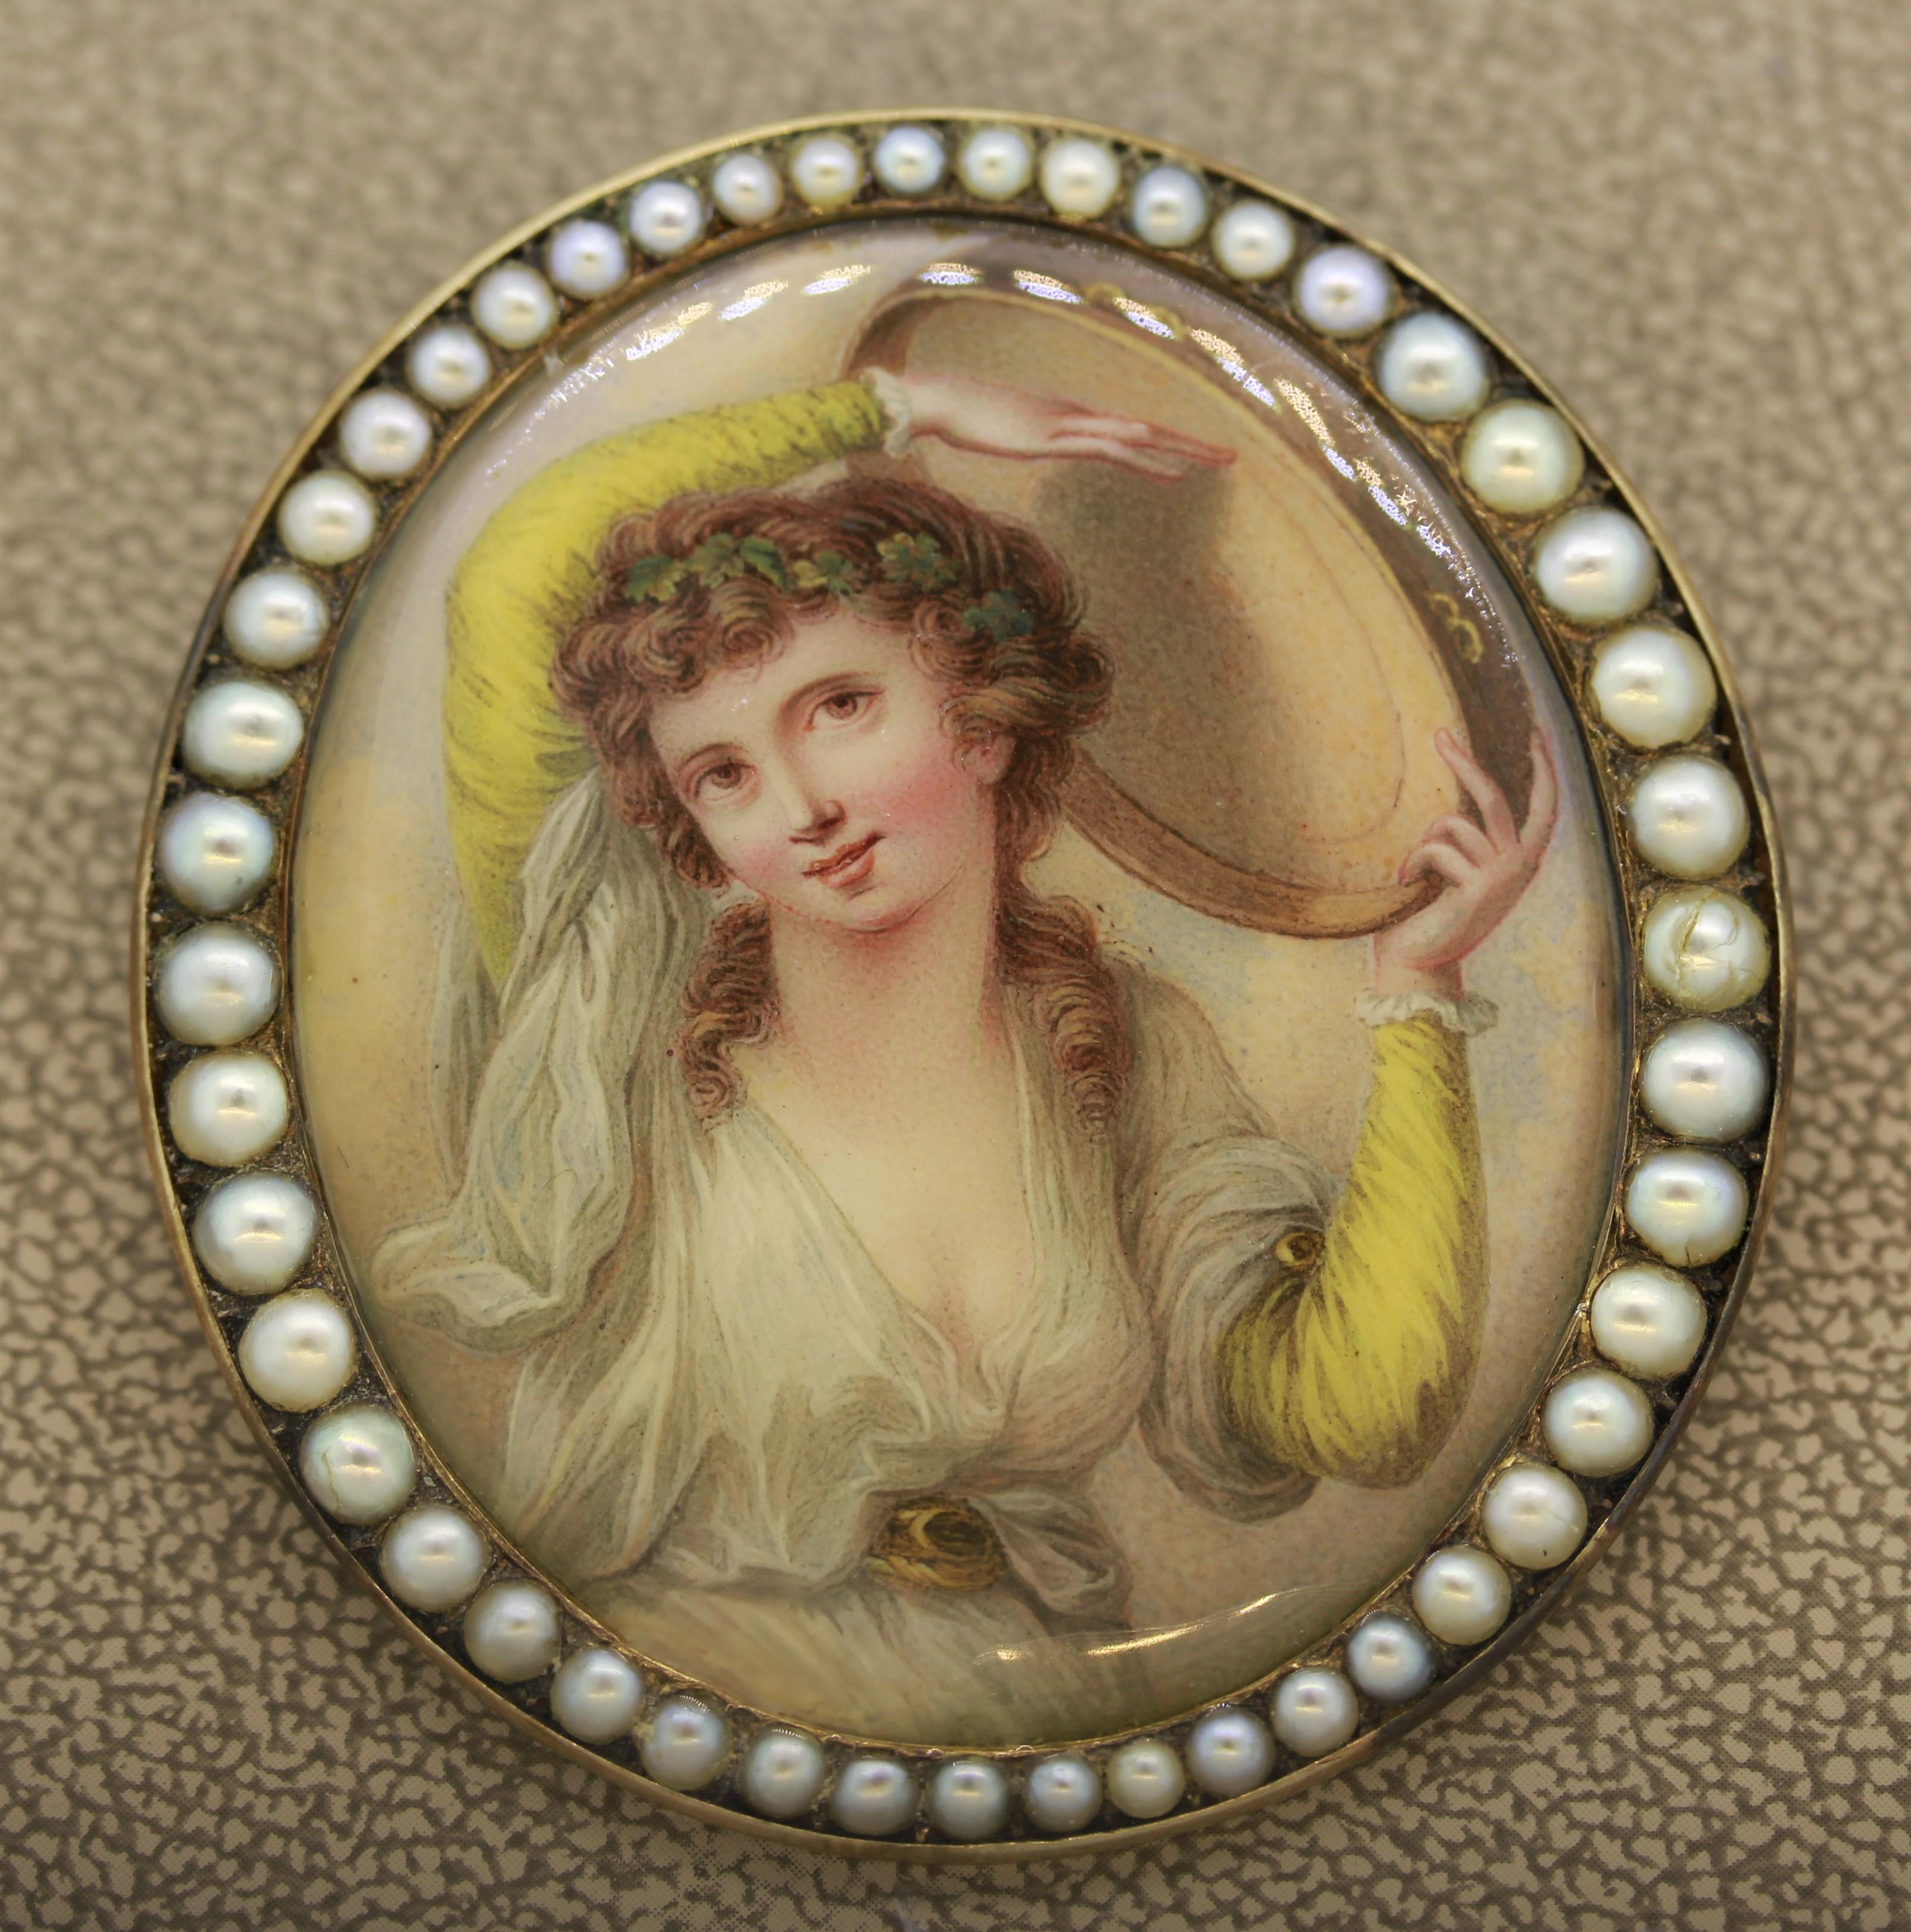 An antique hand painted porcelain depicting a free woman playing a drum. The frame is set with natural seed-pearls in 14k yellow gold. The piece can be worn as a brooch or a pendant if a chain is attached to the bail. The pin-lock is missing a